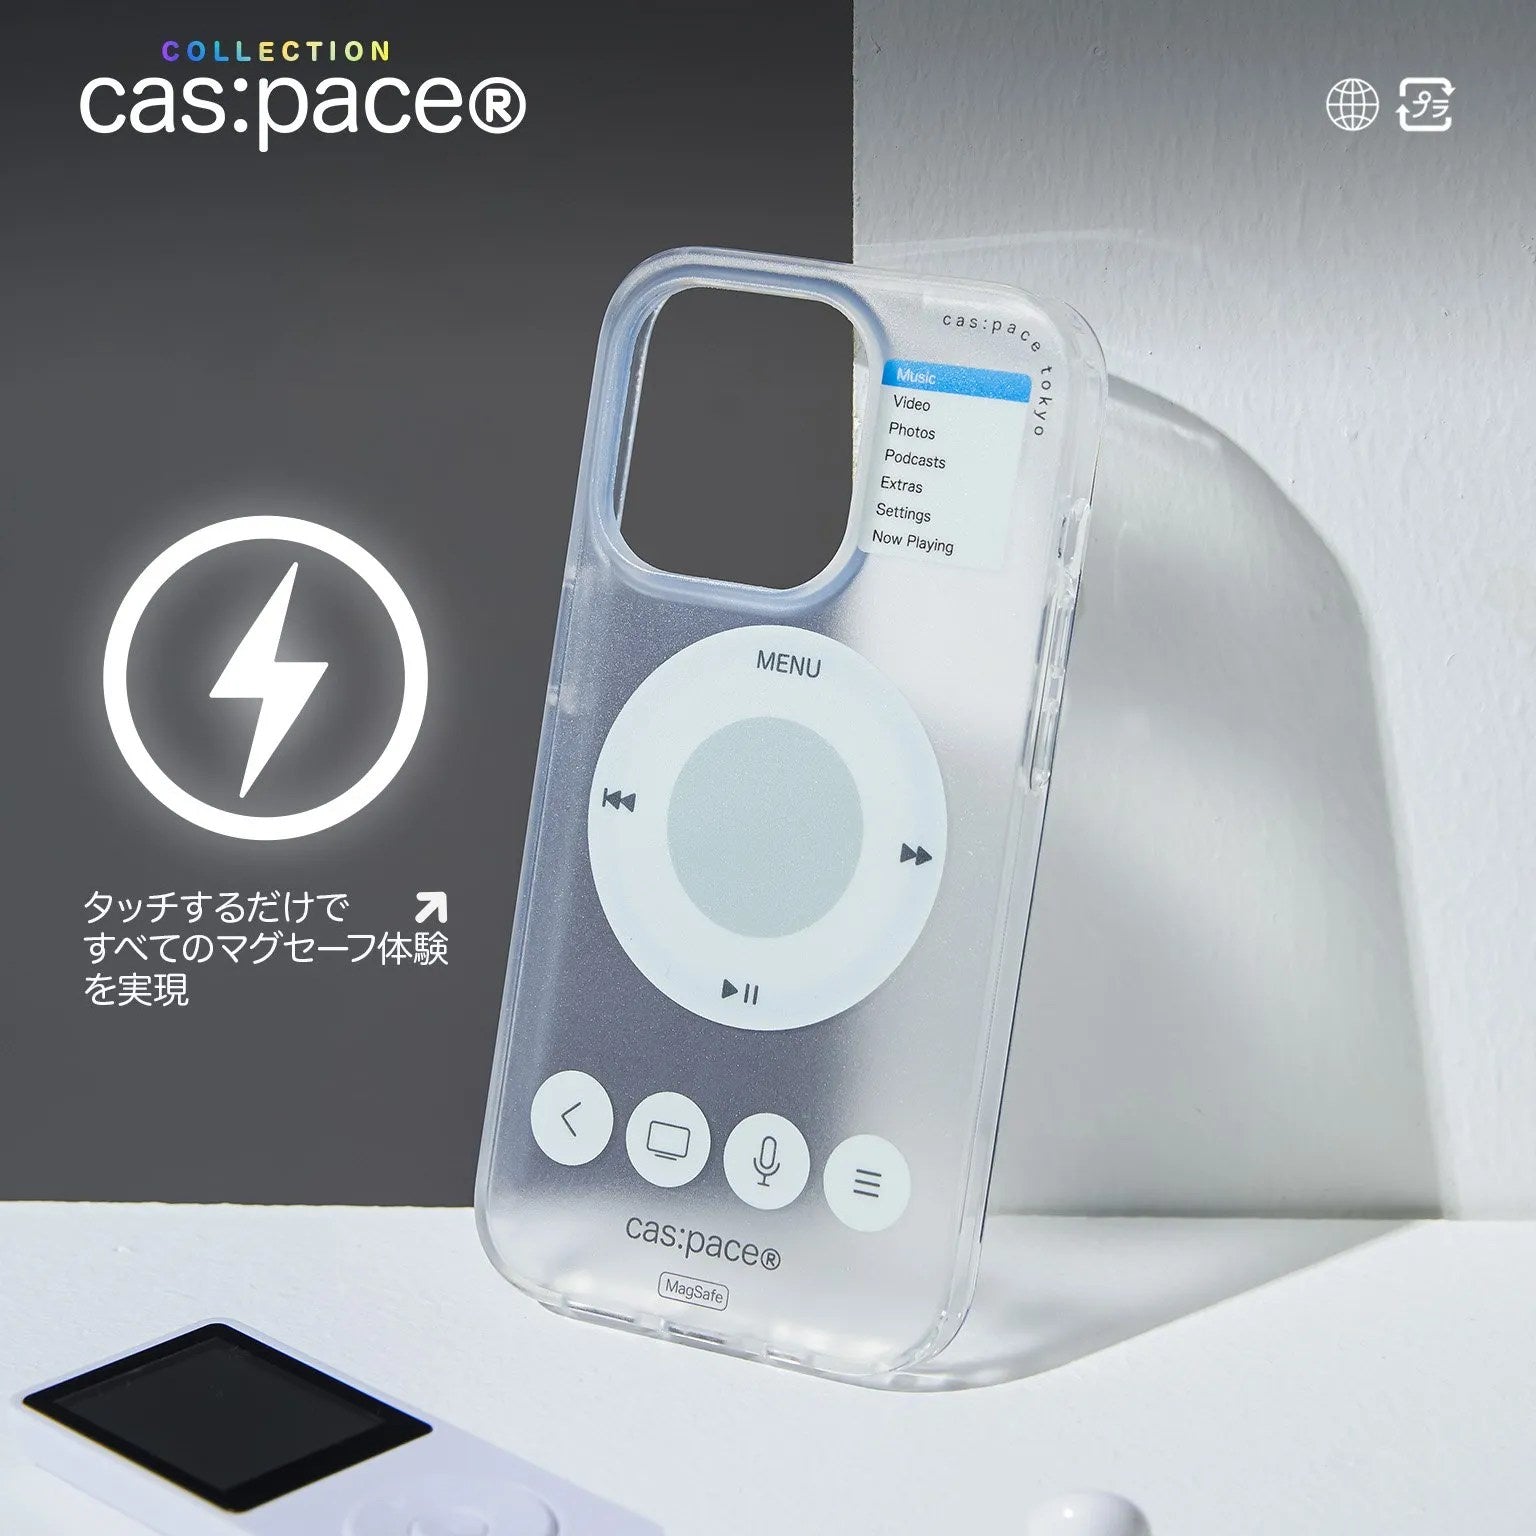 cas:pace collection「MP3プレーヤー」MagSafe対応携帯ケース - cas:pace 殼空間